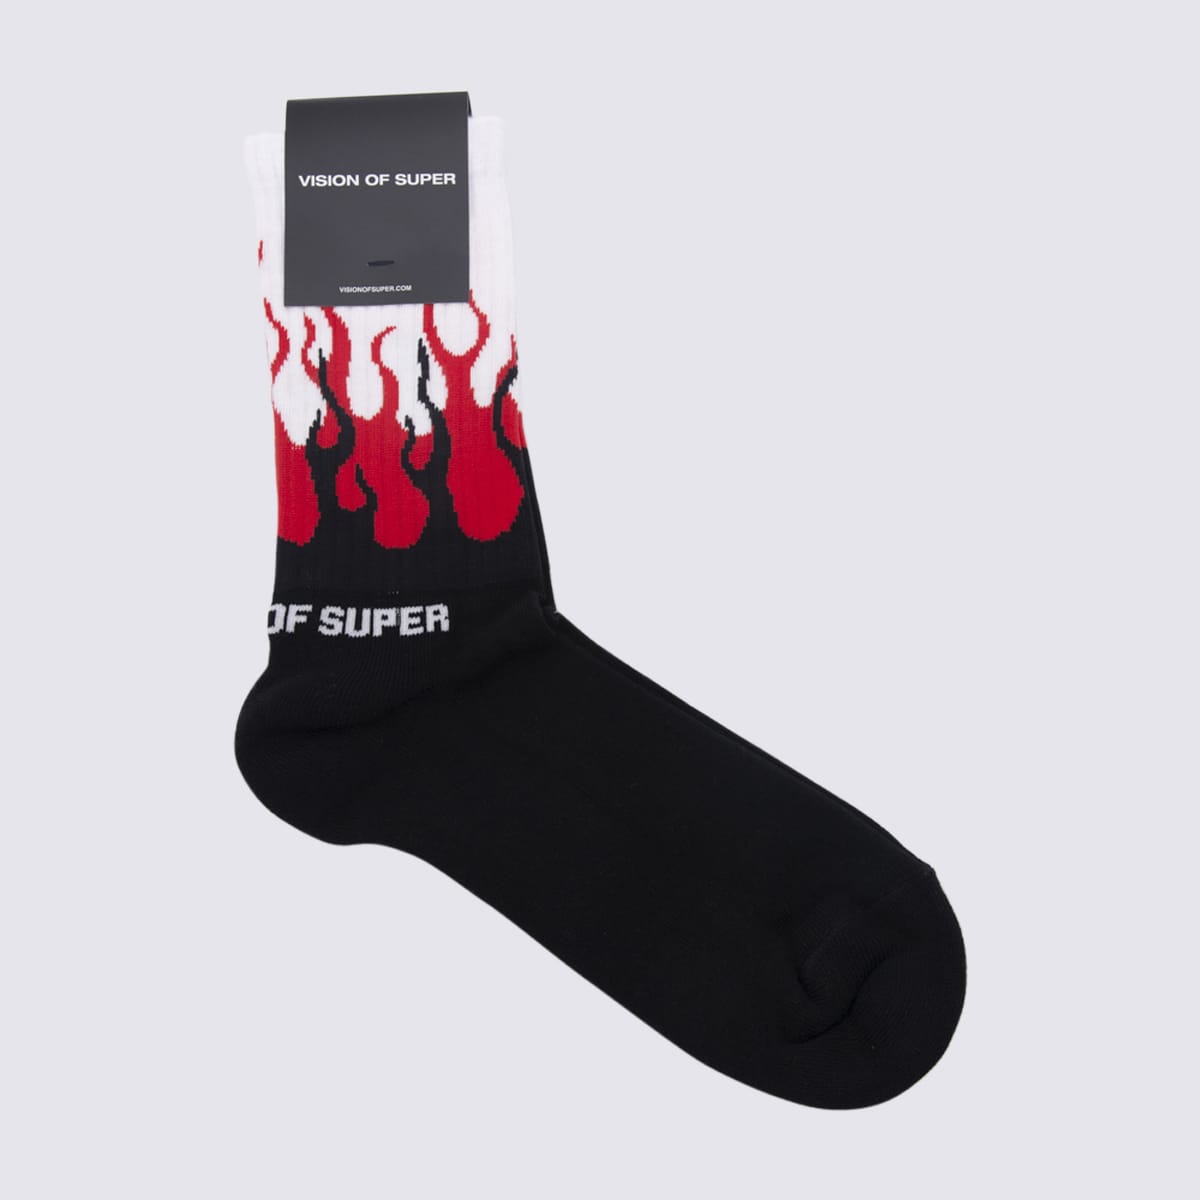 Vision Of Super Black Cotton Blend Socks In Red Double Flames